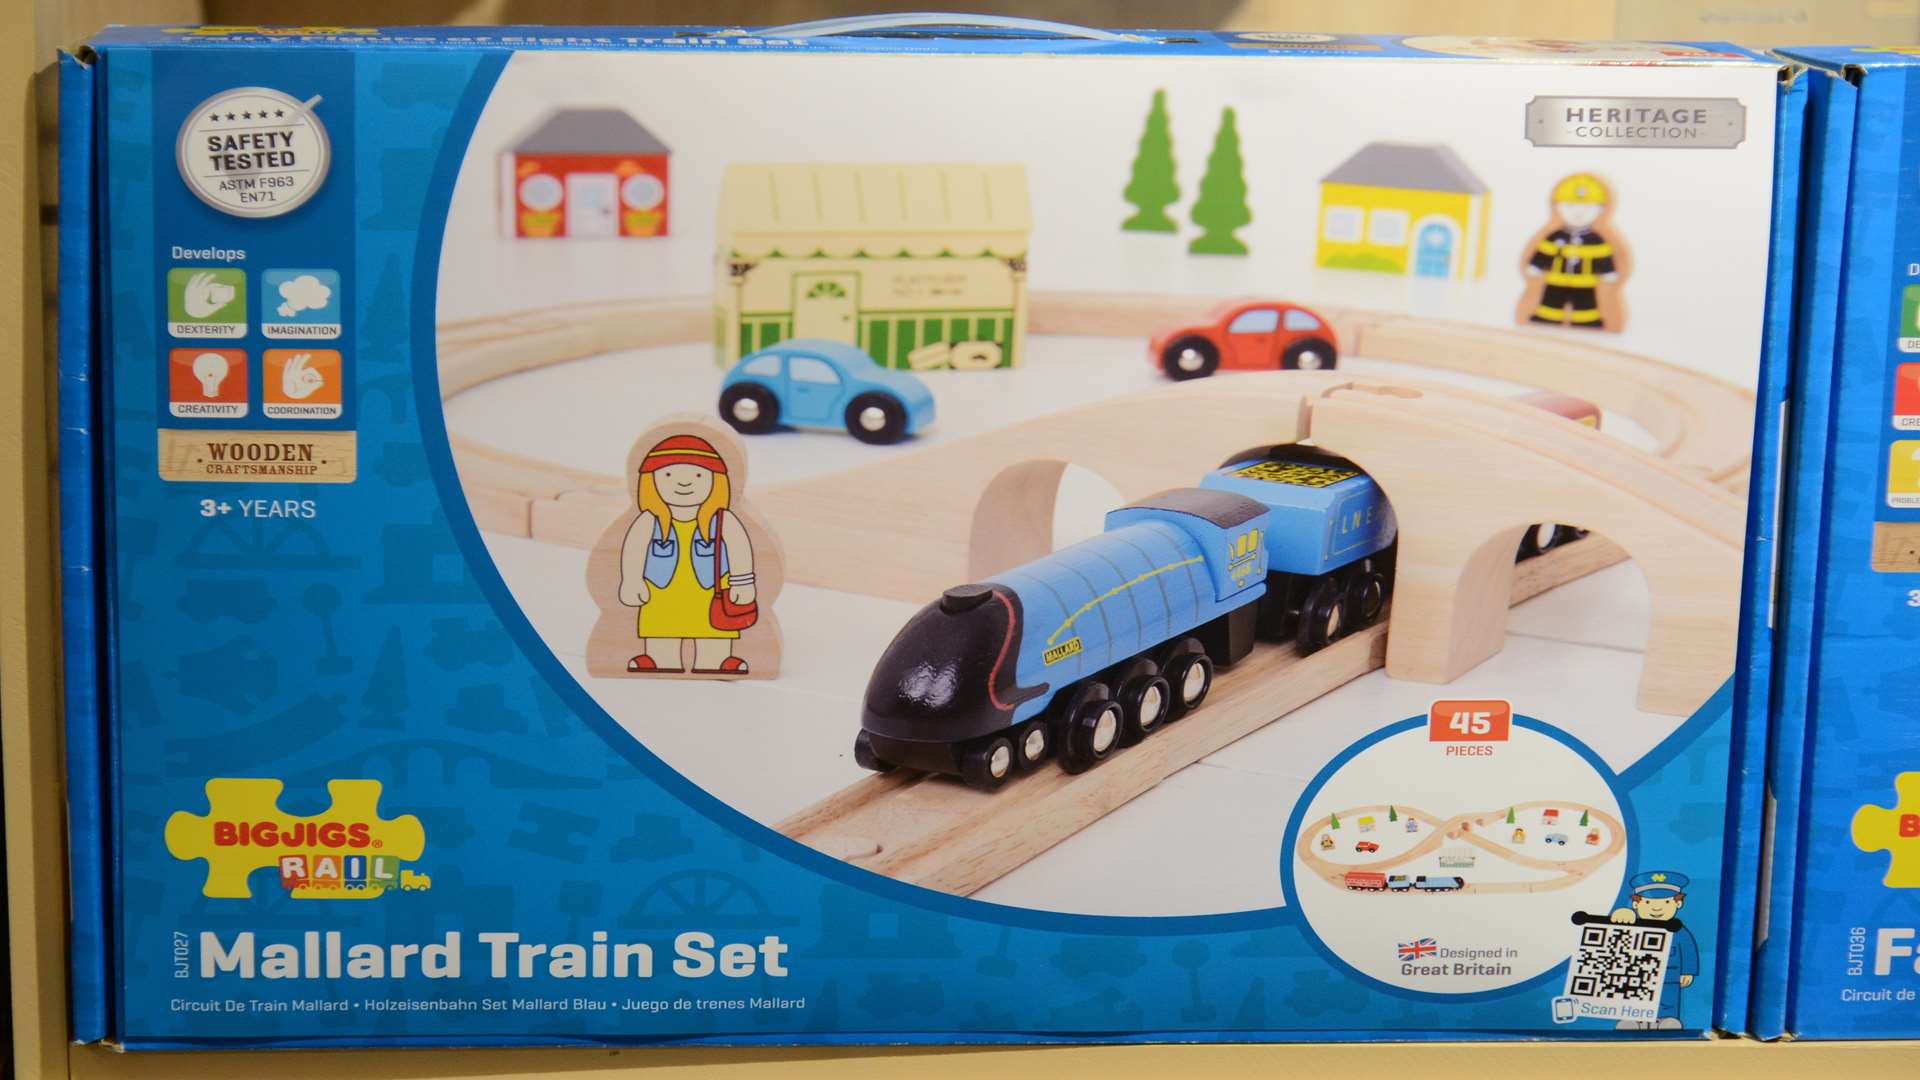 Bigjig Toys makes and sells wooden trains, dolls and games